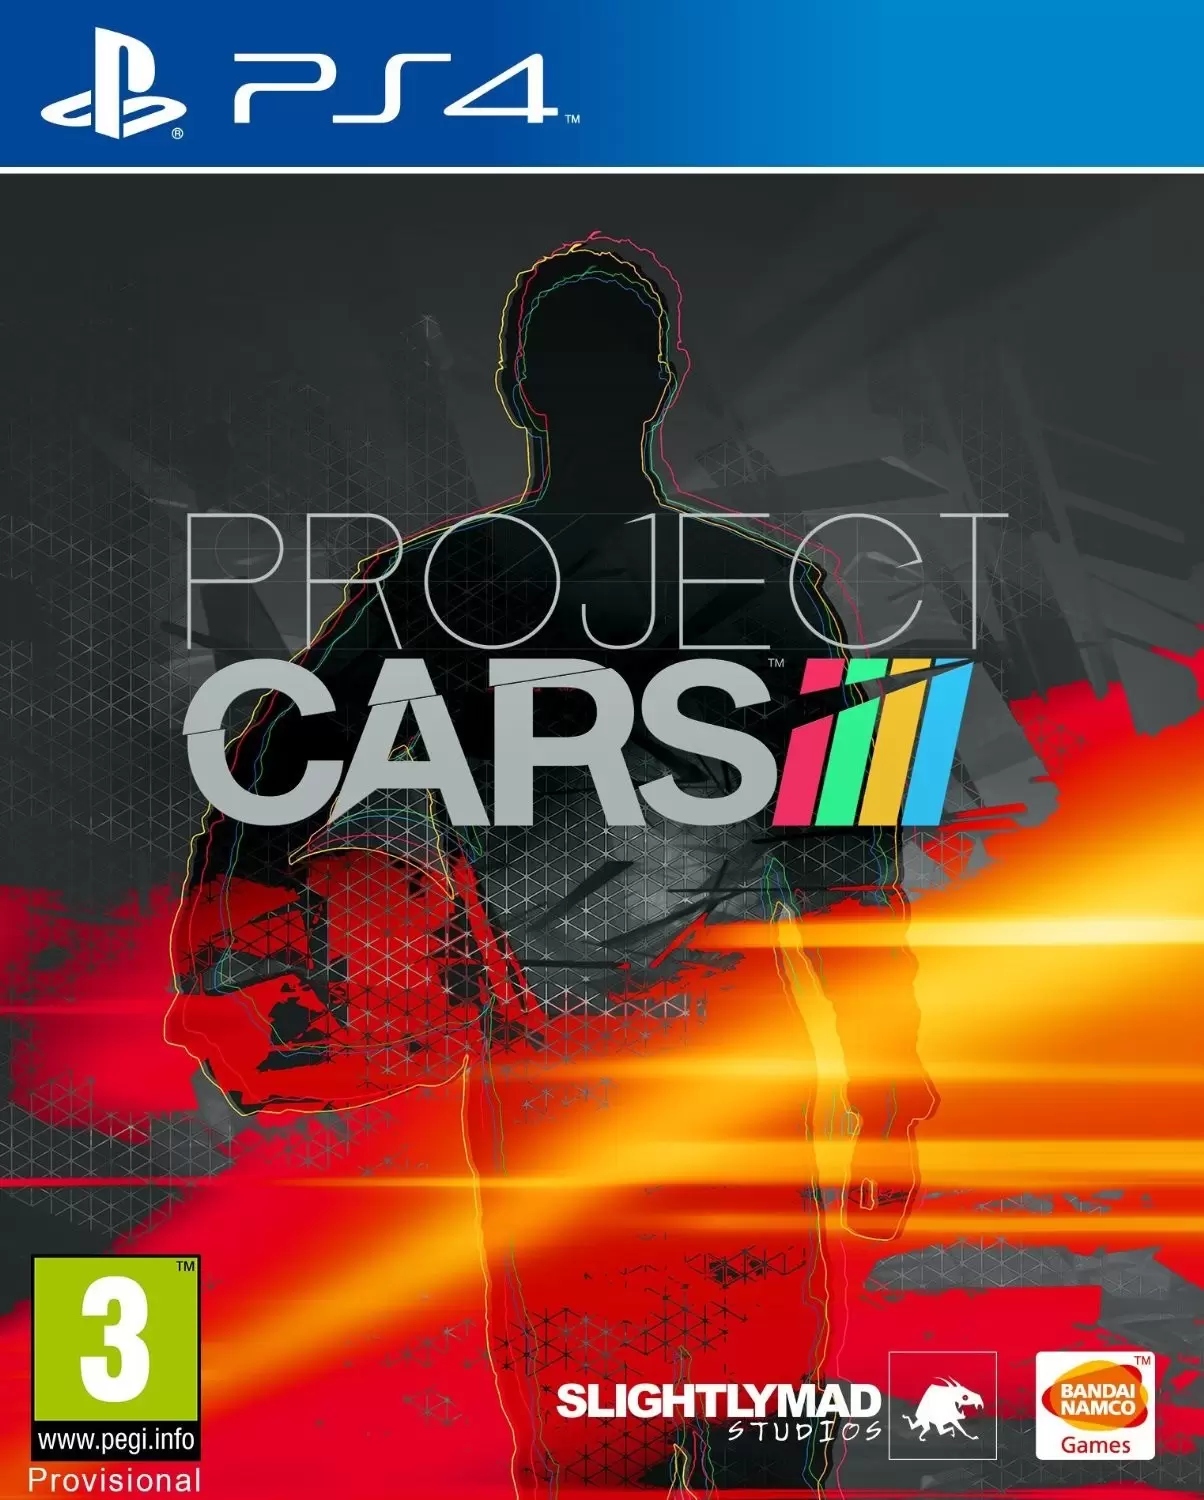 PS4 Games - Project CARS